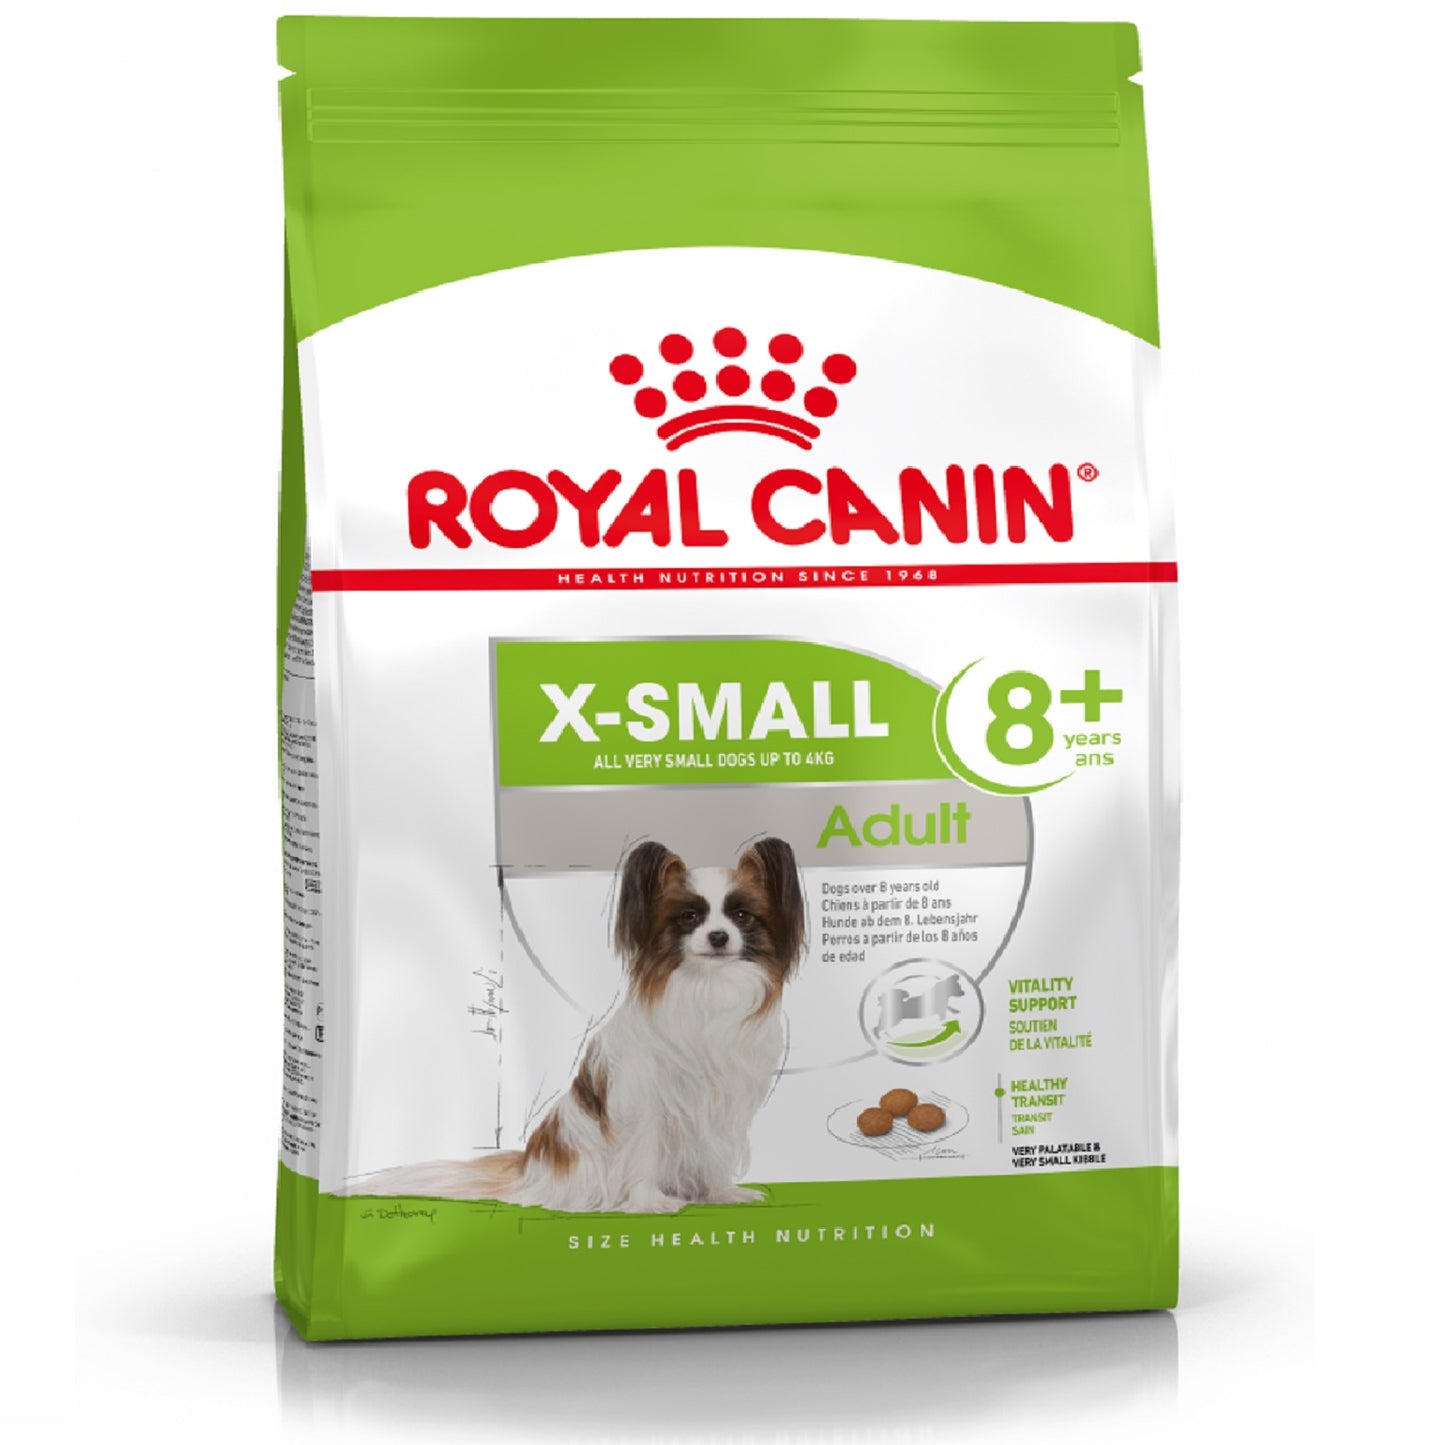 ROYAL CANIN - X-Small Adult 8+ (1.5kg)